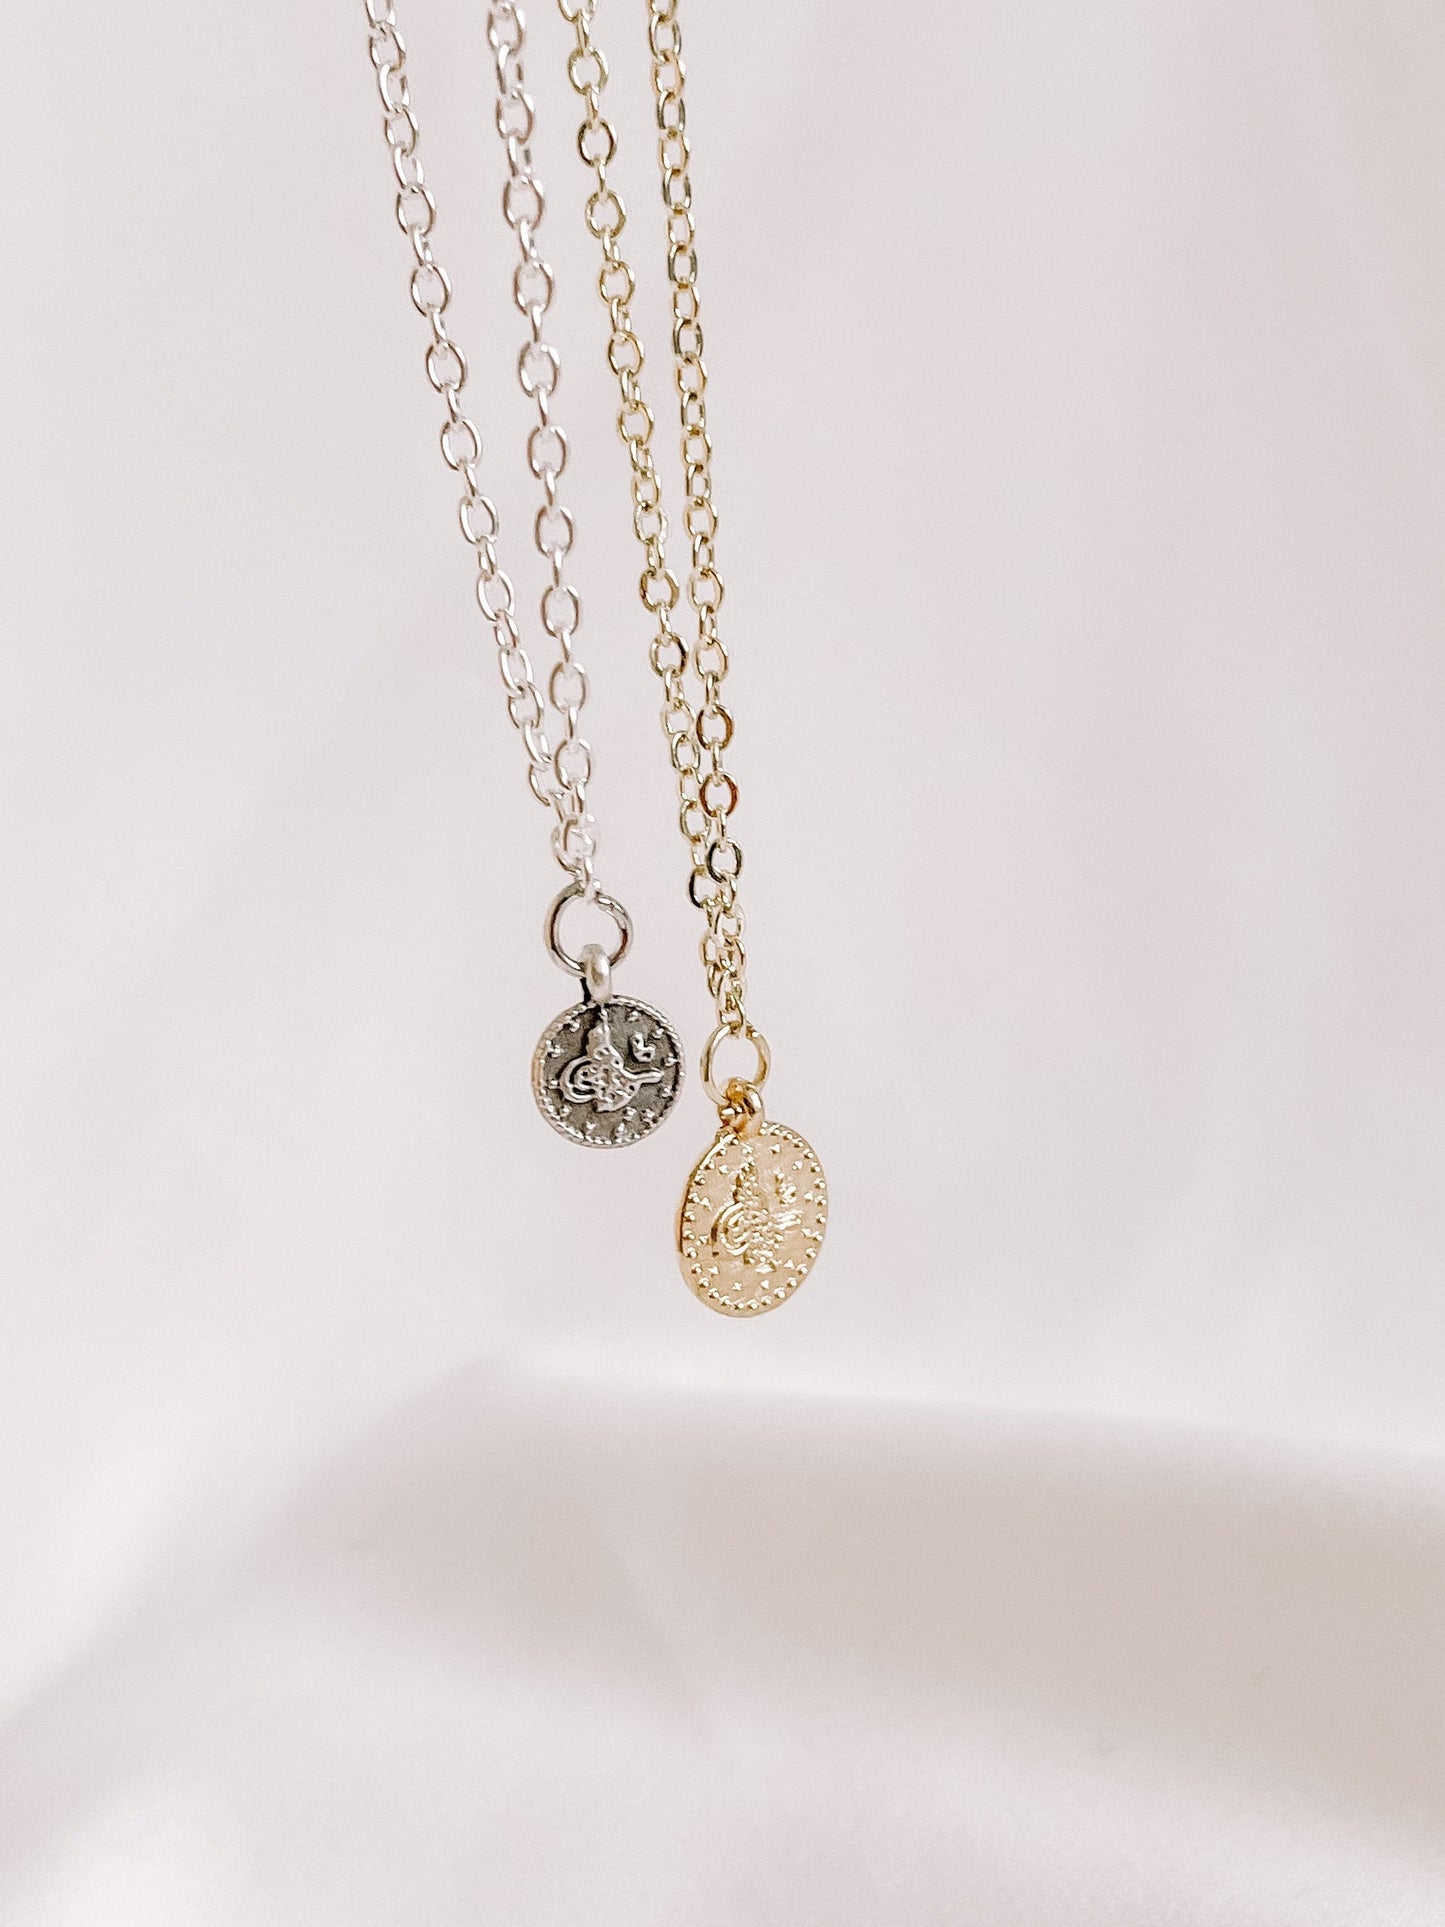 Coin charm necklace